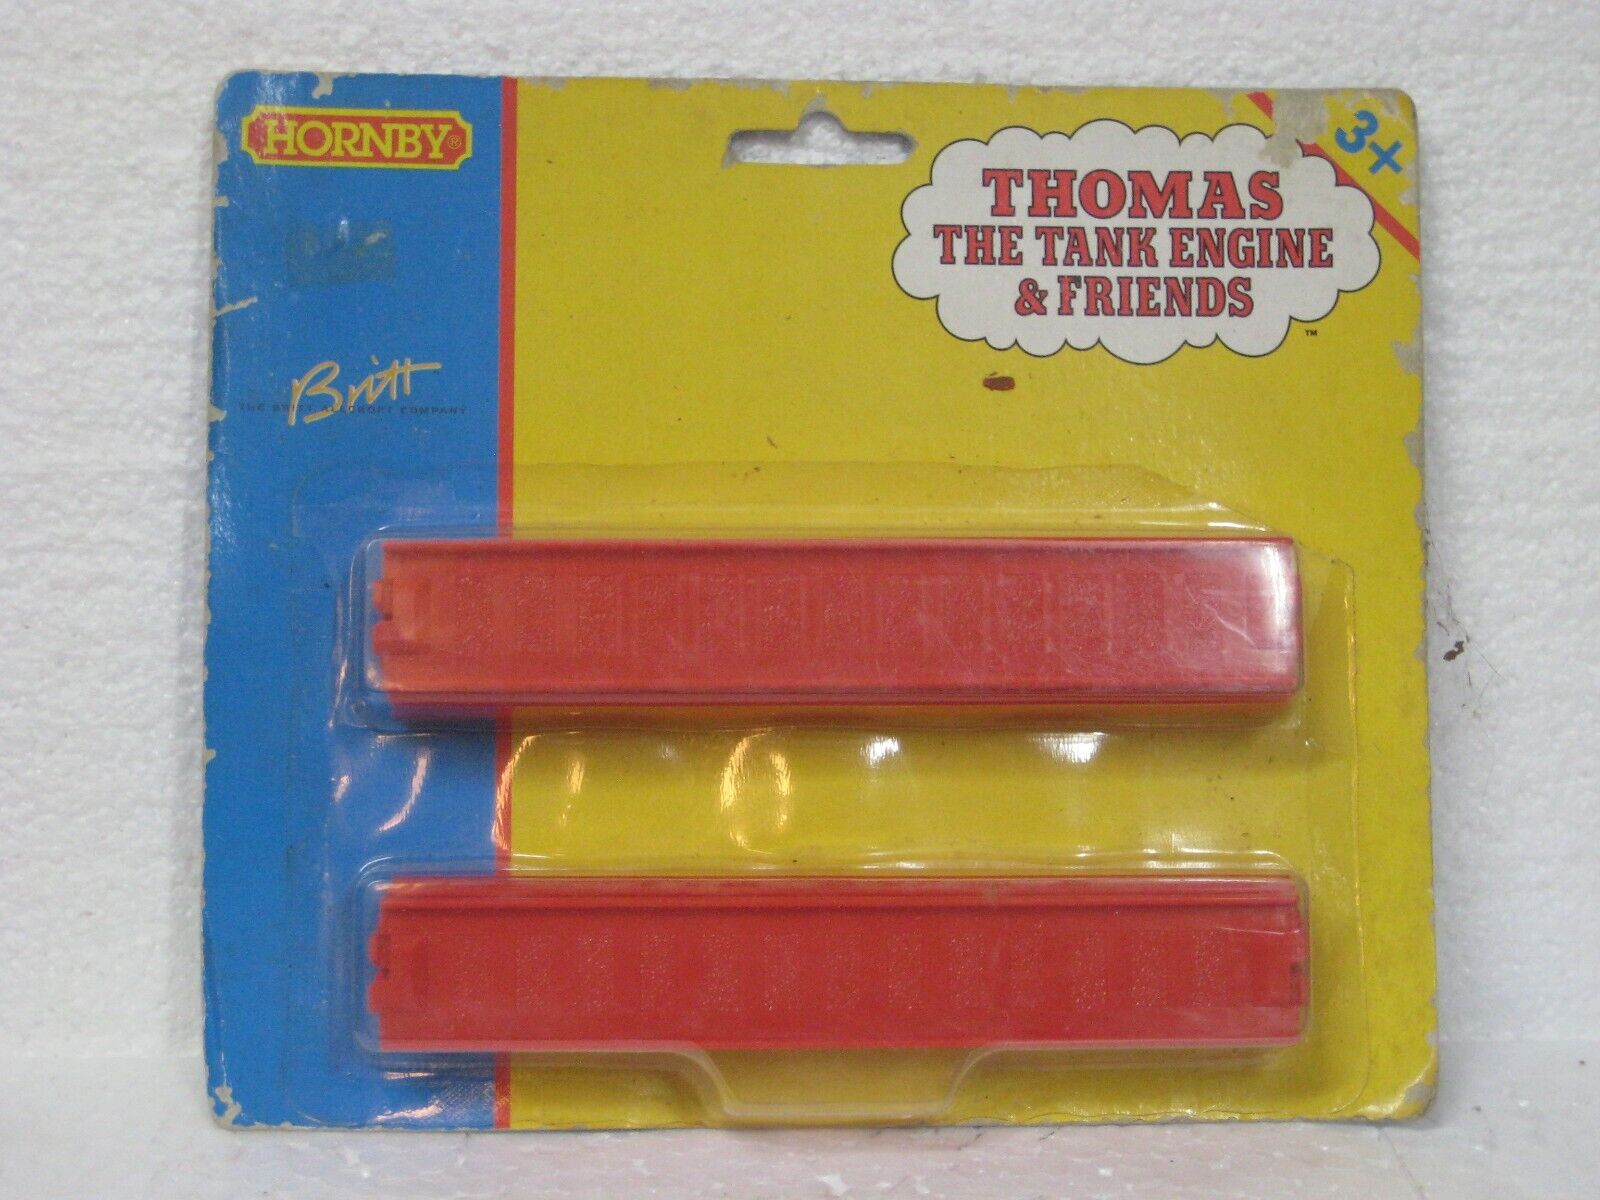 THOMAS THE TANK ENGINE & FRIENDS STRAIGHT RED PLASTIC TRACK BY HORNBY 9013